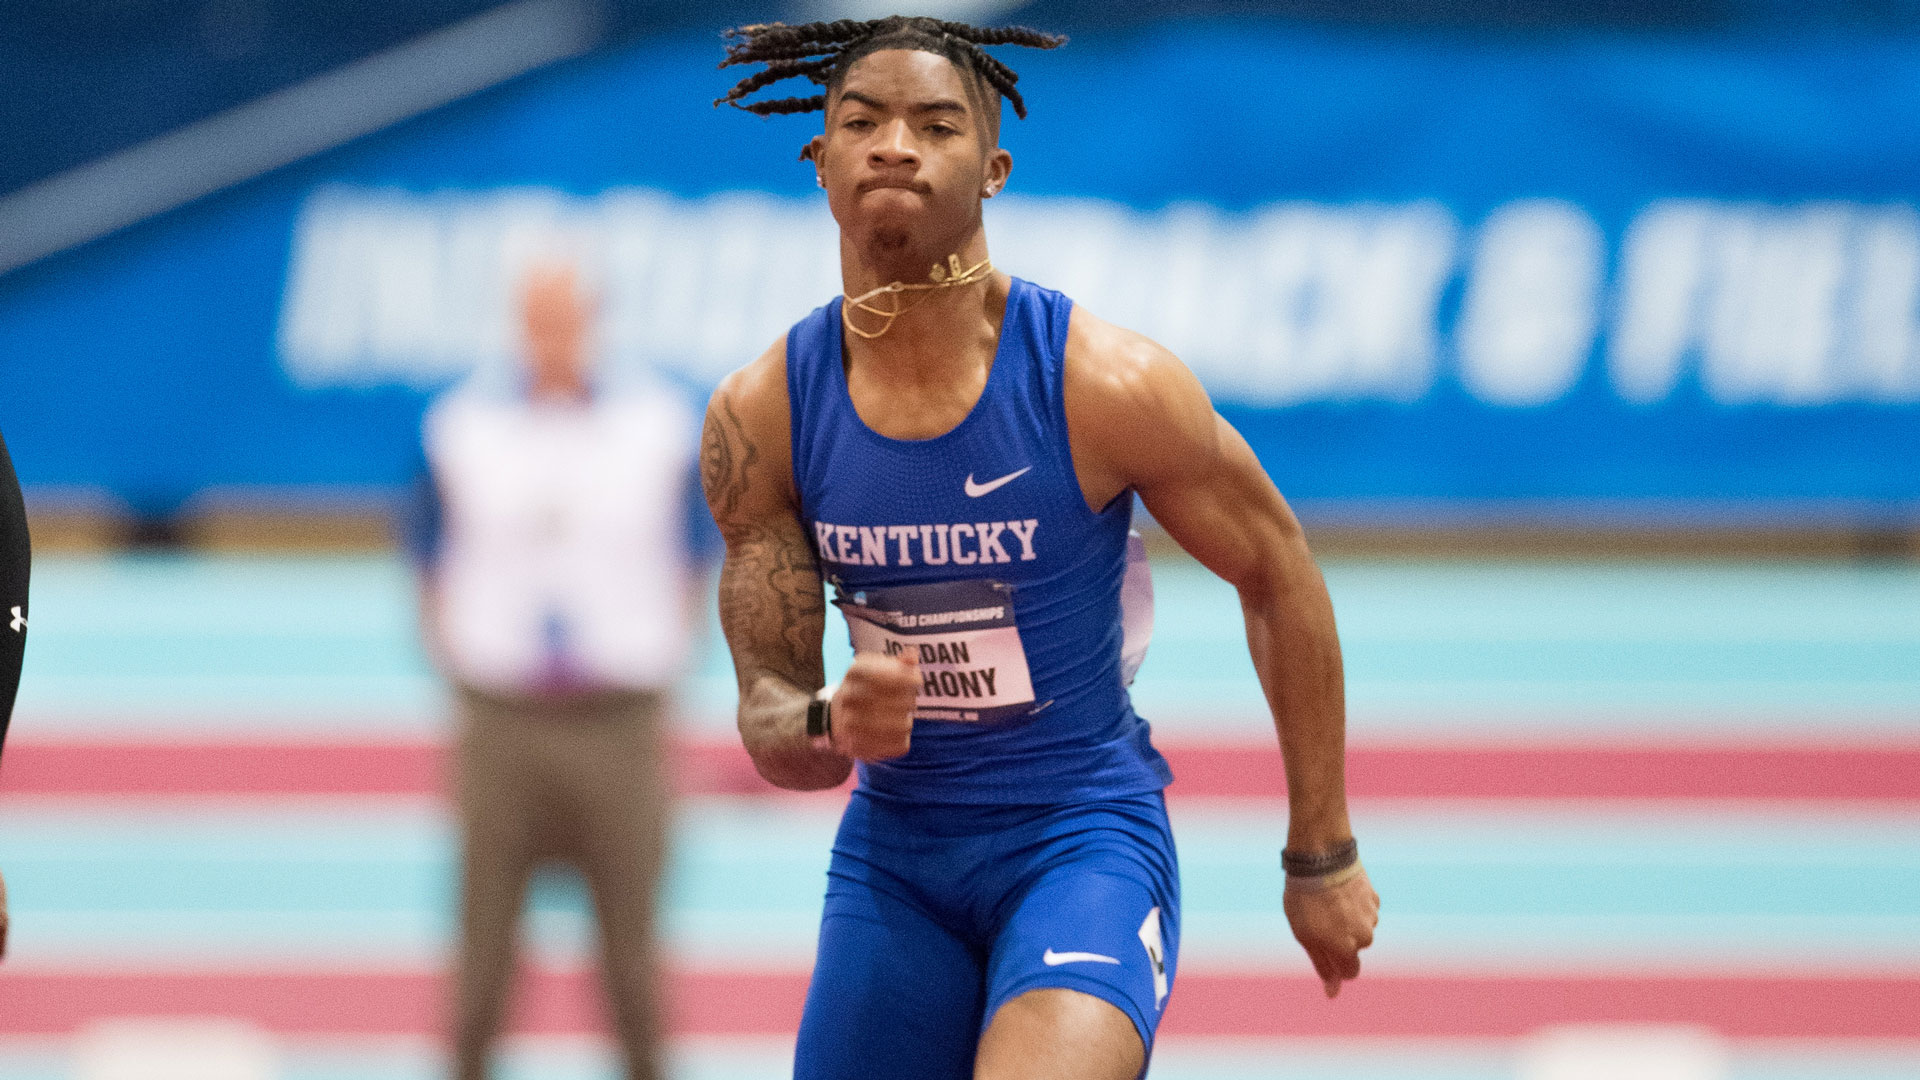 Jordan Anthony and Masai Russell Earn Silvers at NCAA Indoors